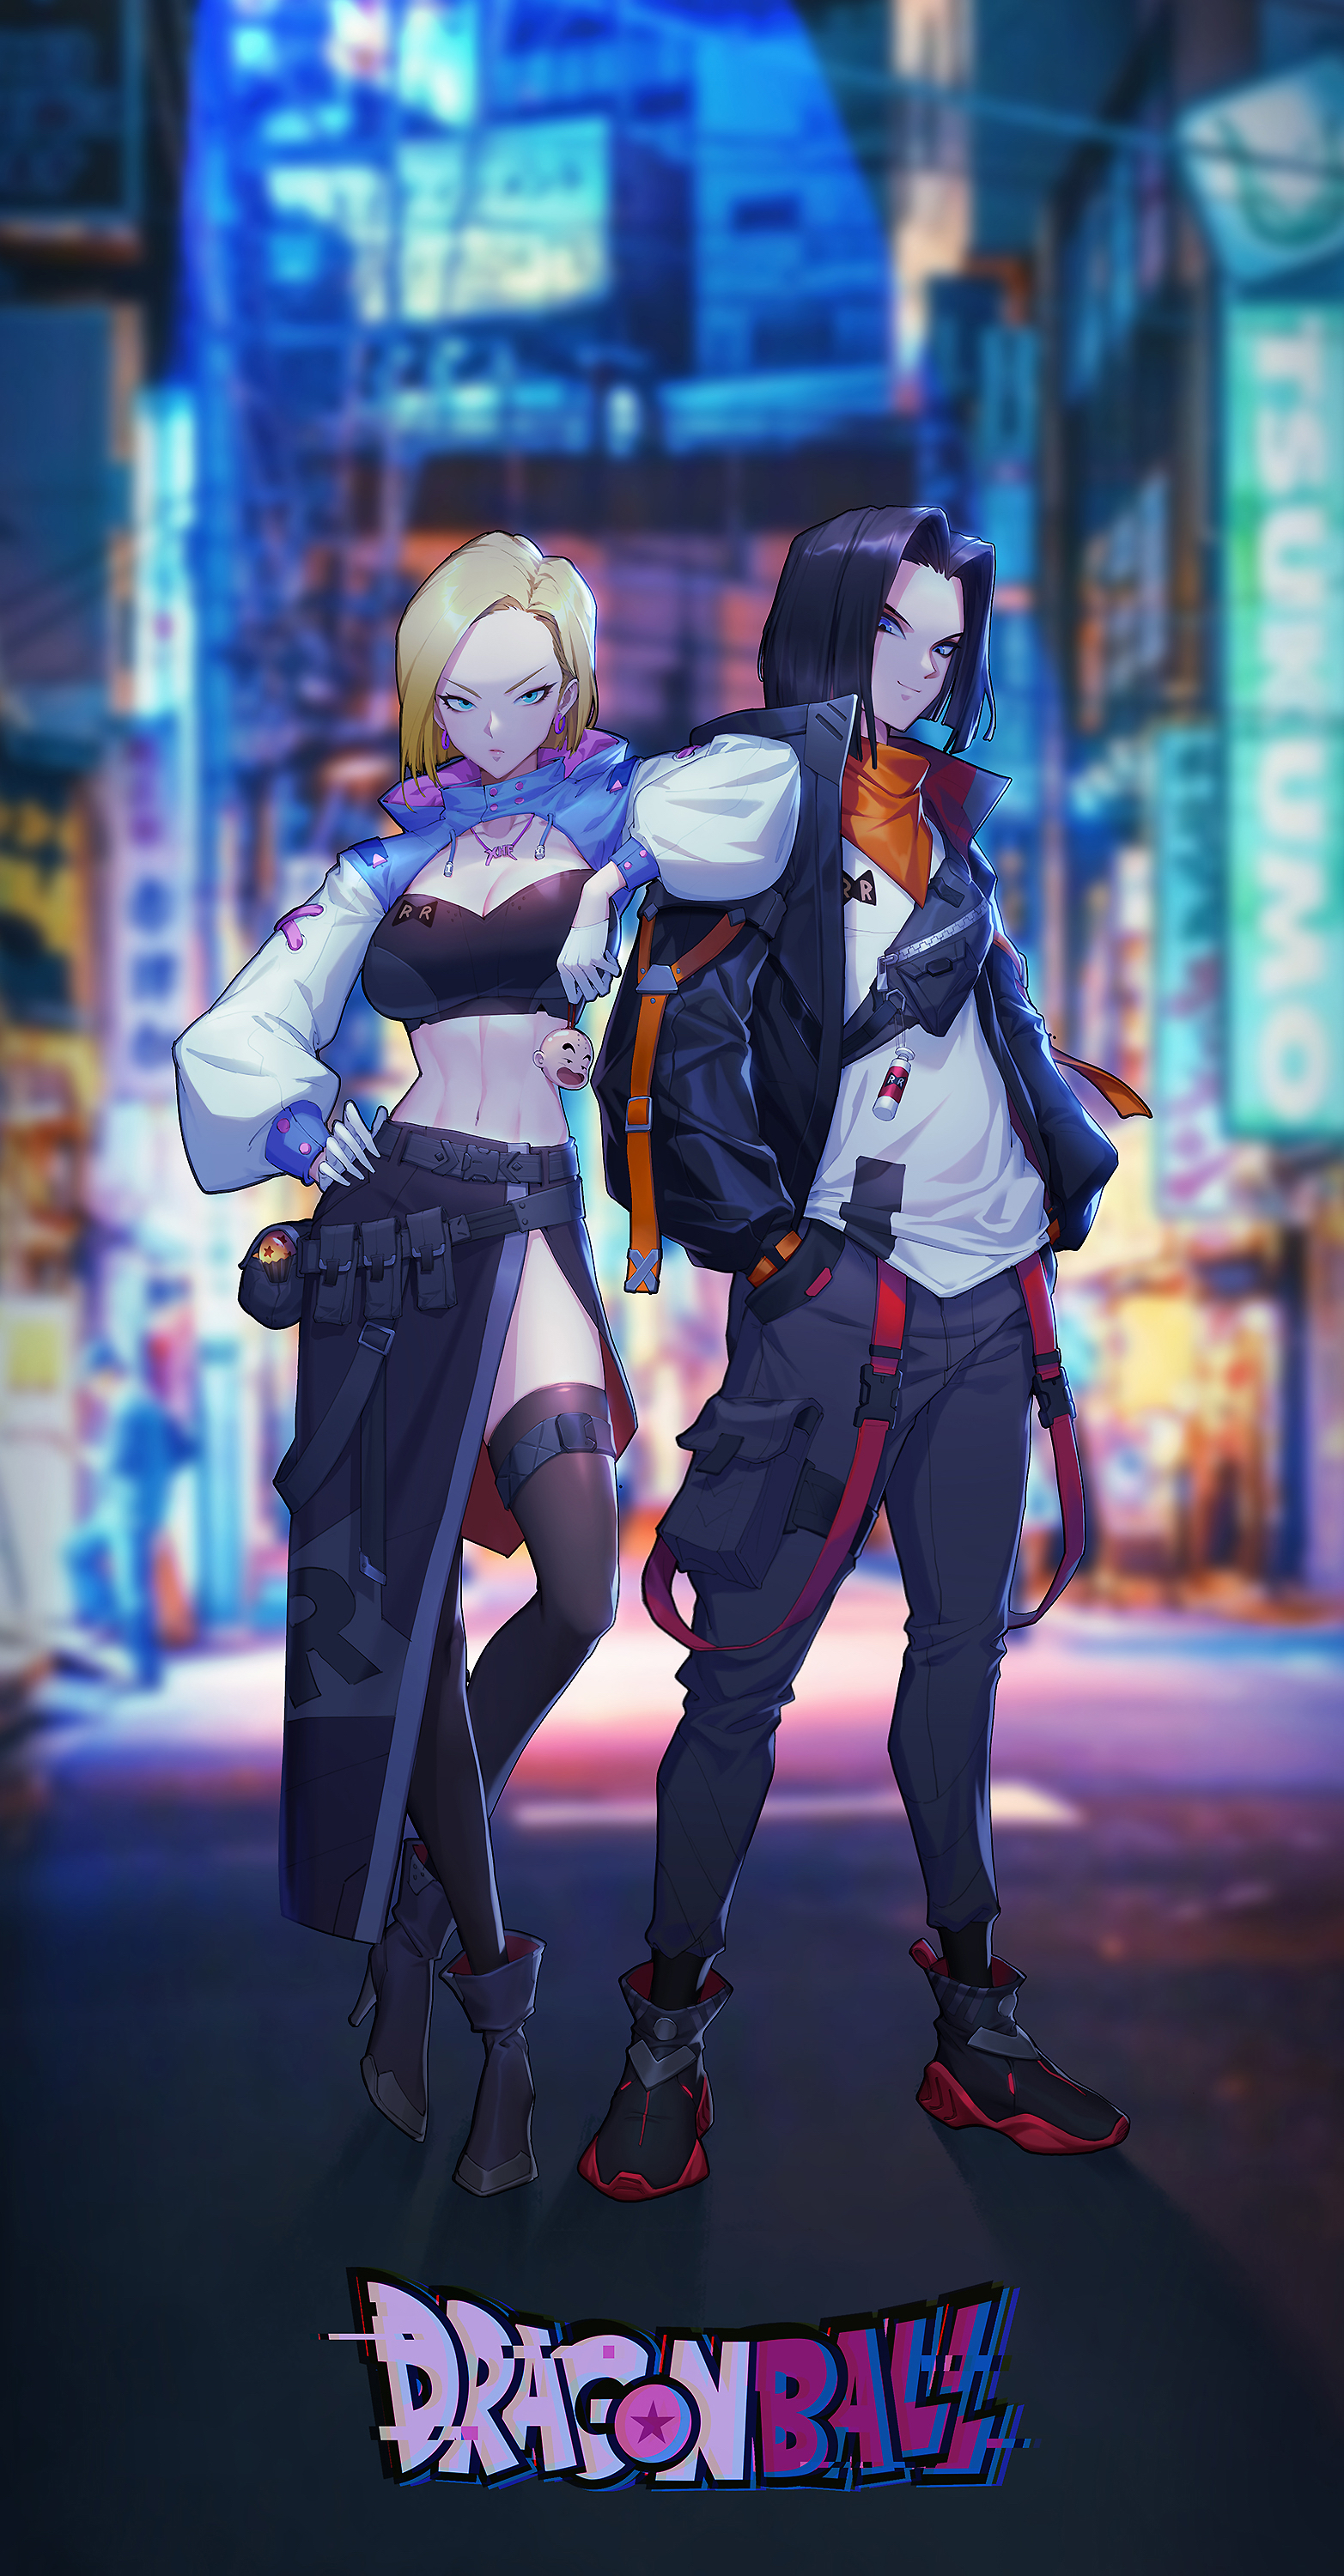 In the city - Anime, Anime art, Dragon ball, Broly, Town, Android 18, Chirai, Longpost